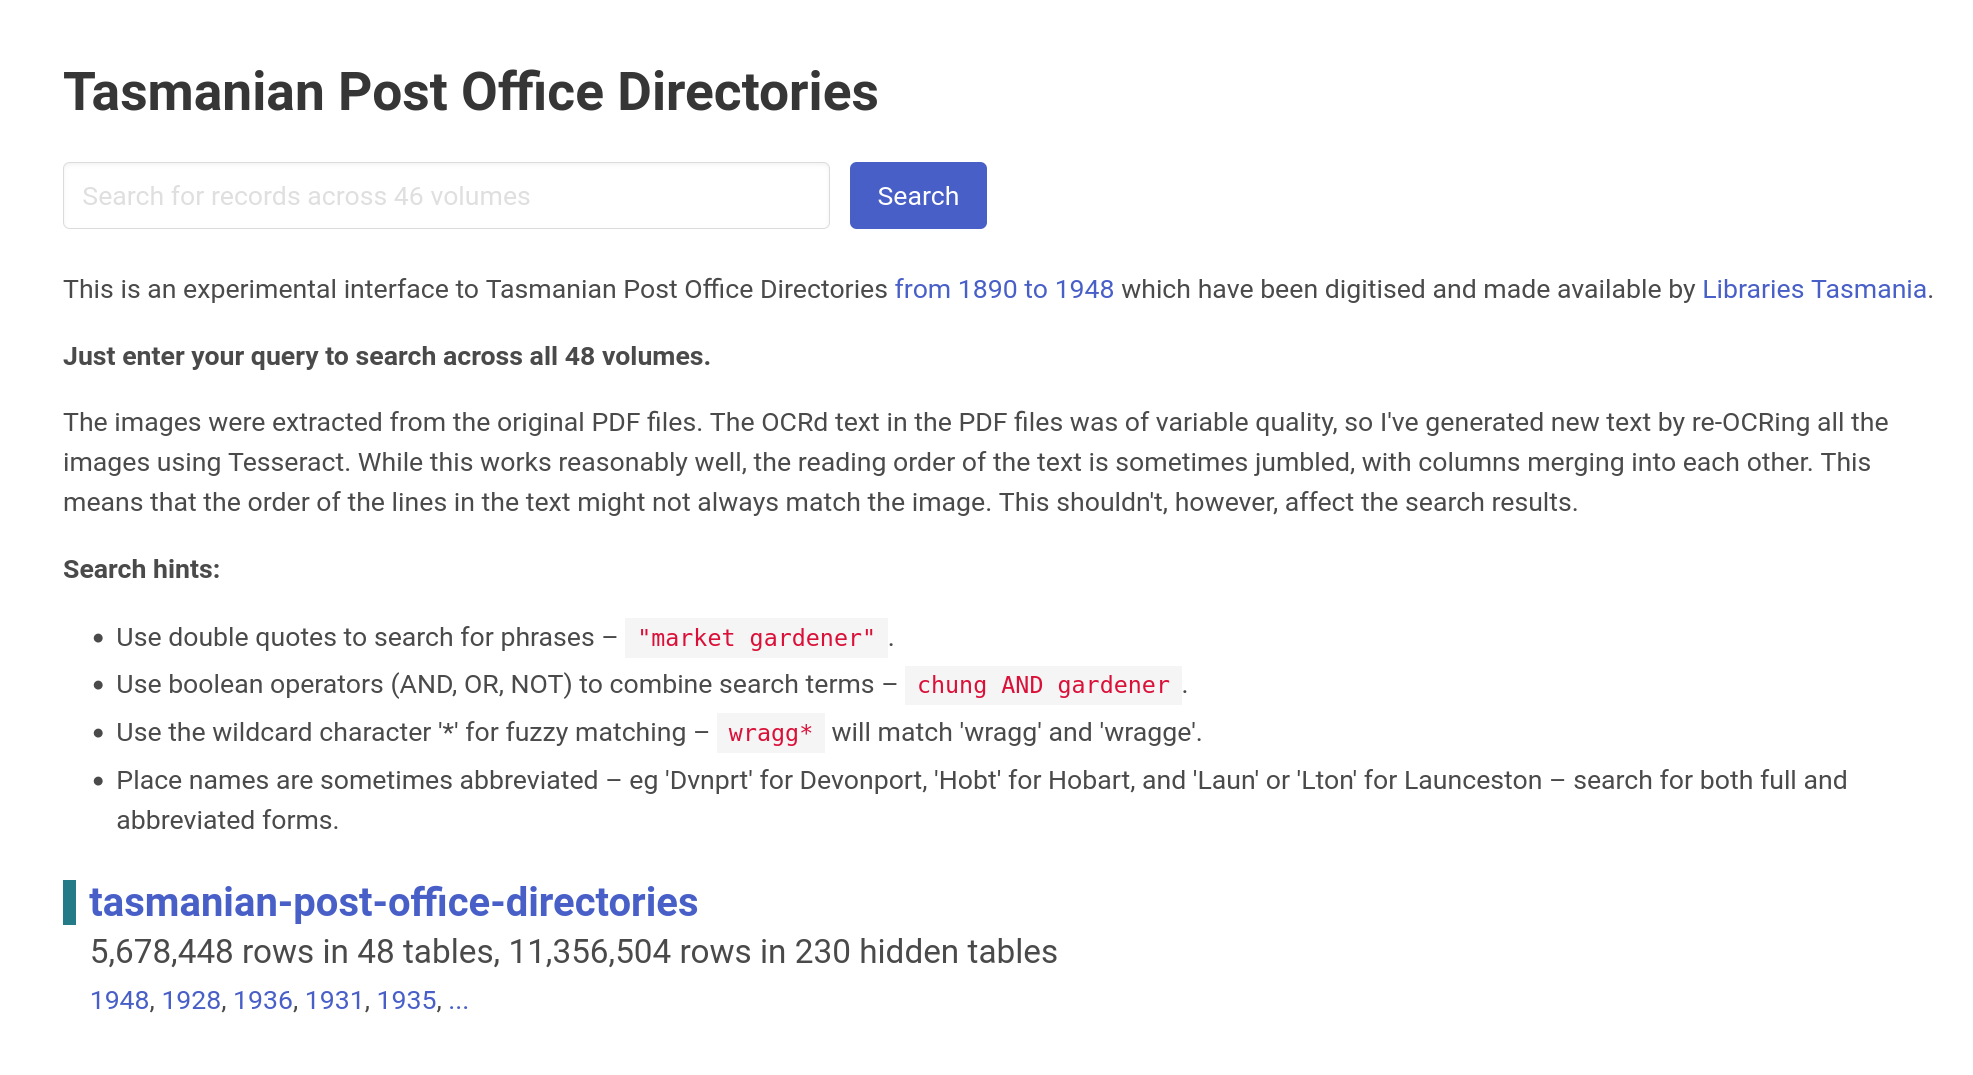 Screenshot of search interface for the Tasmanian Post Office Directories.